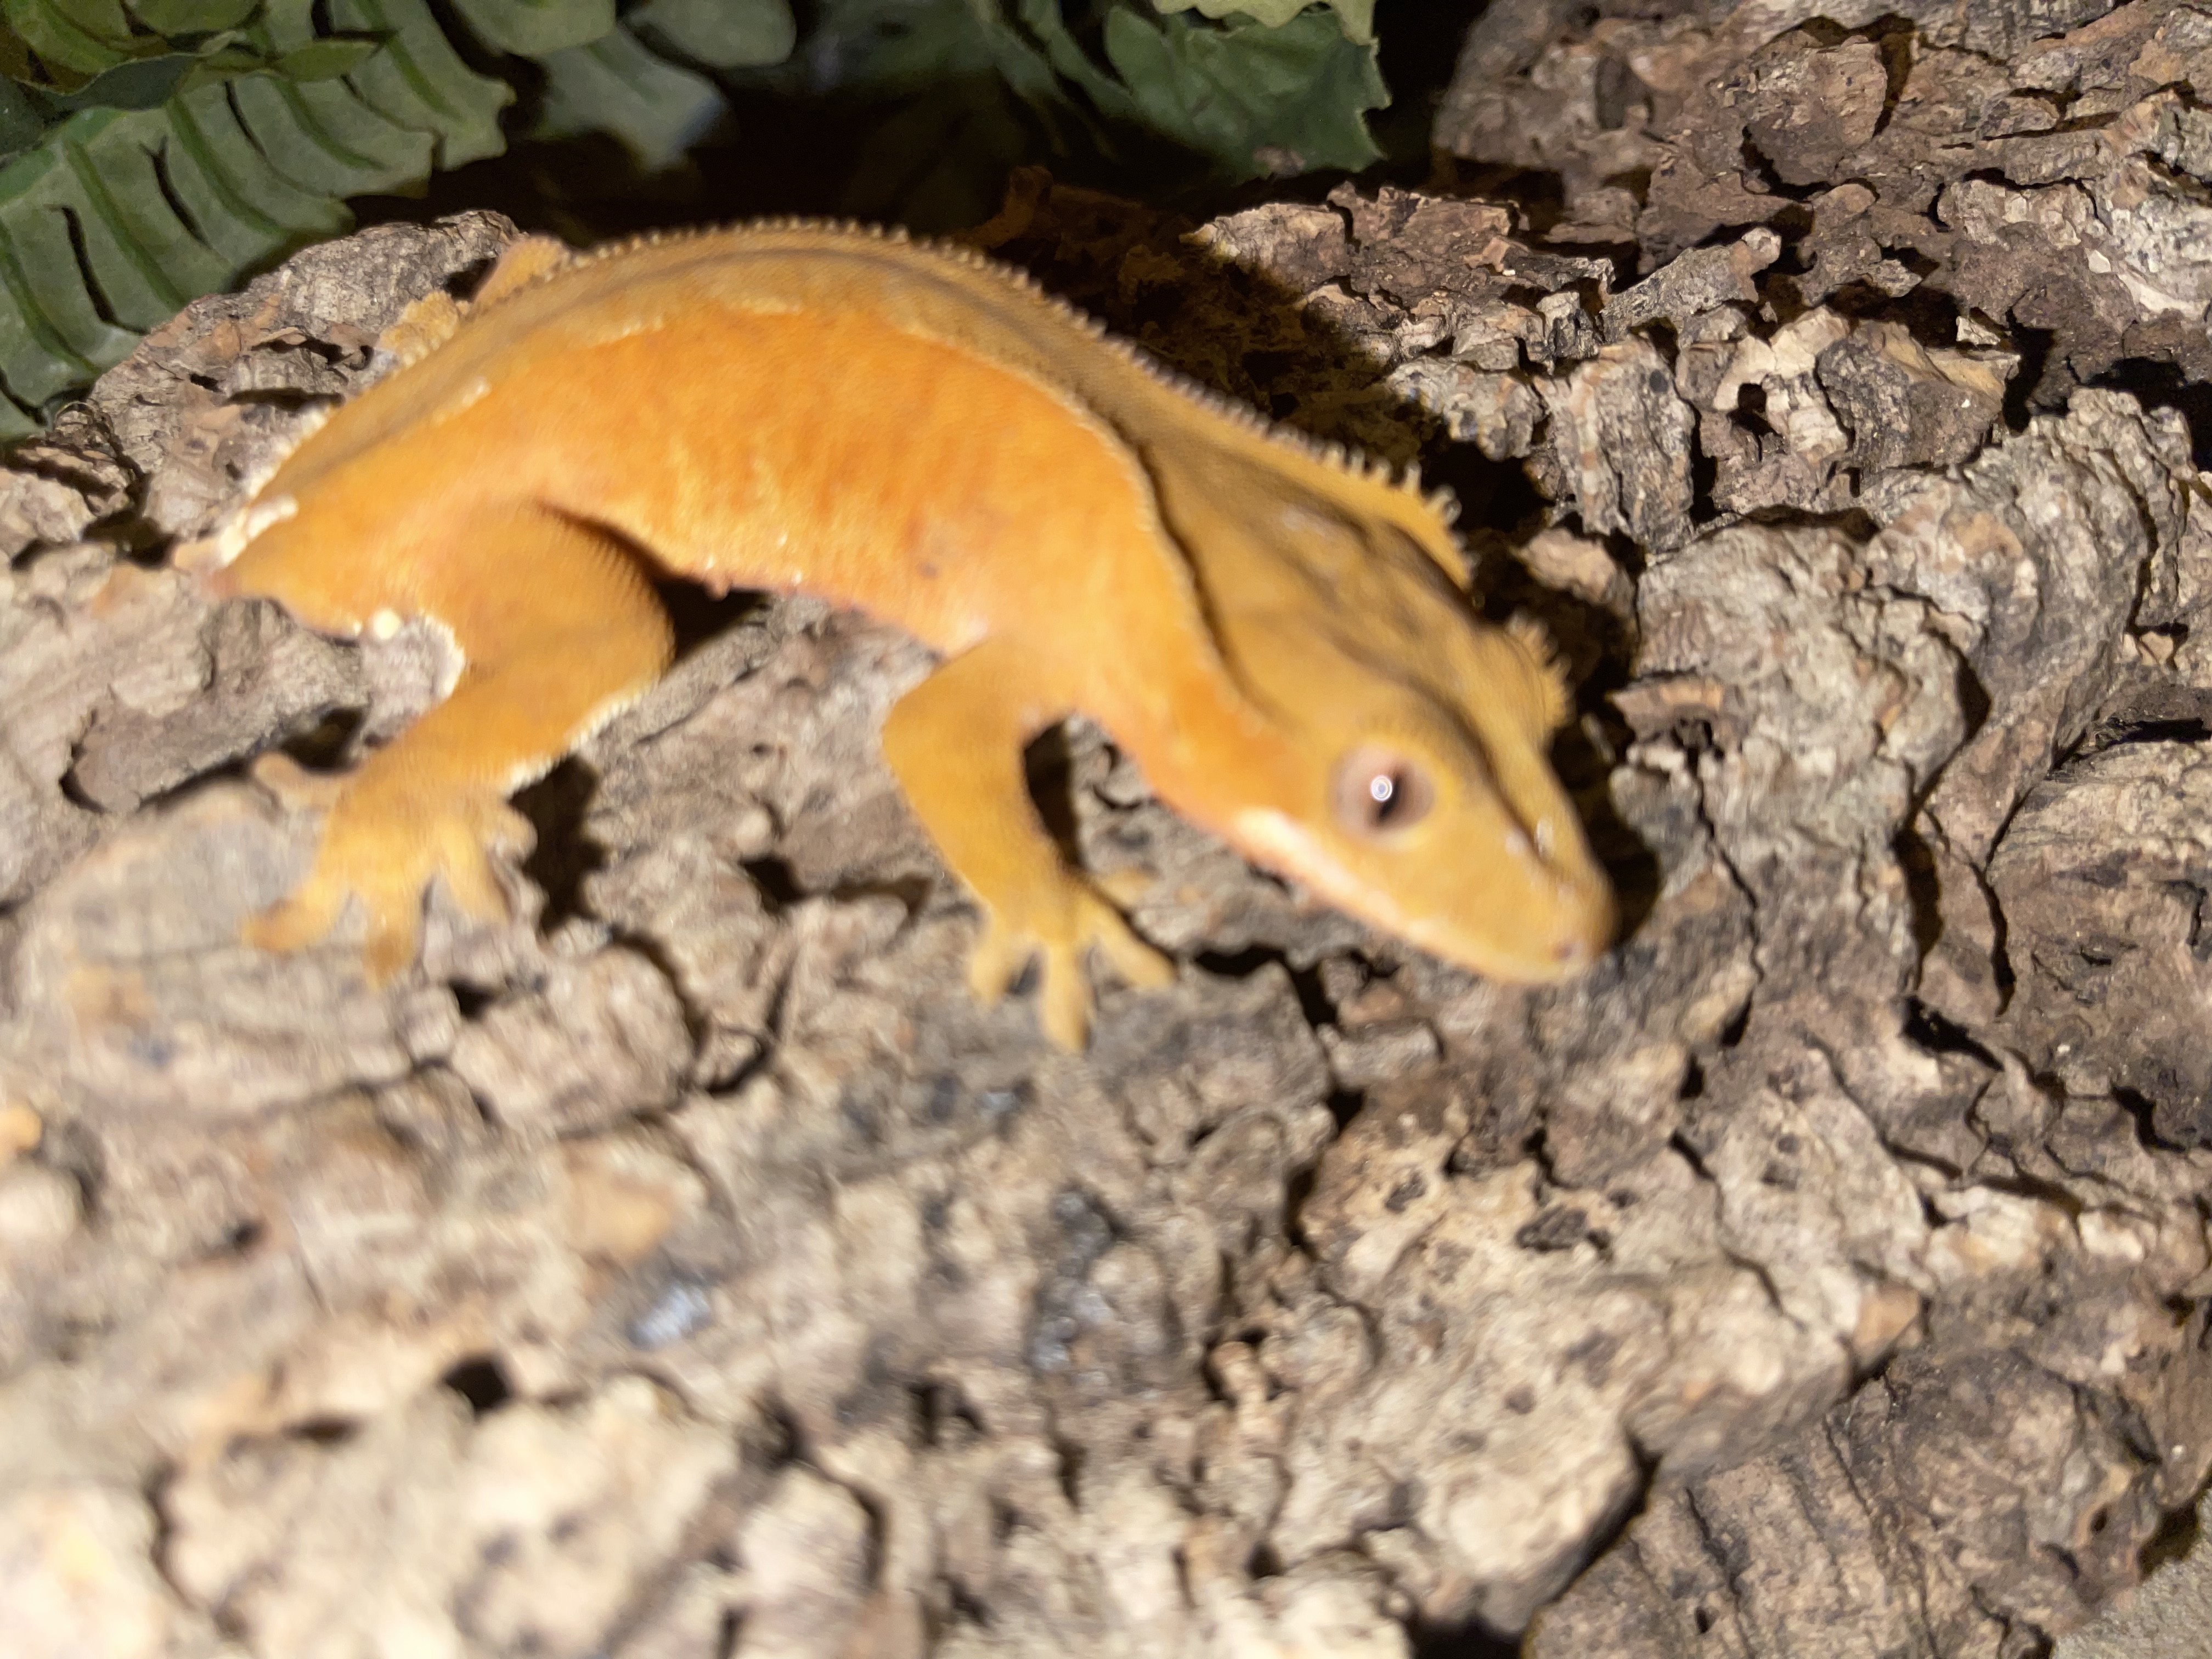 Red Crested Gecko by Taylor exotics